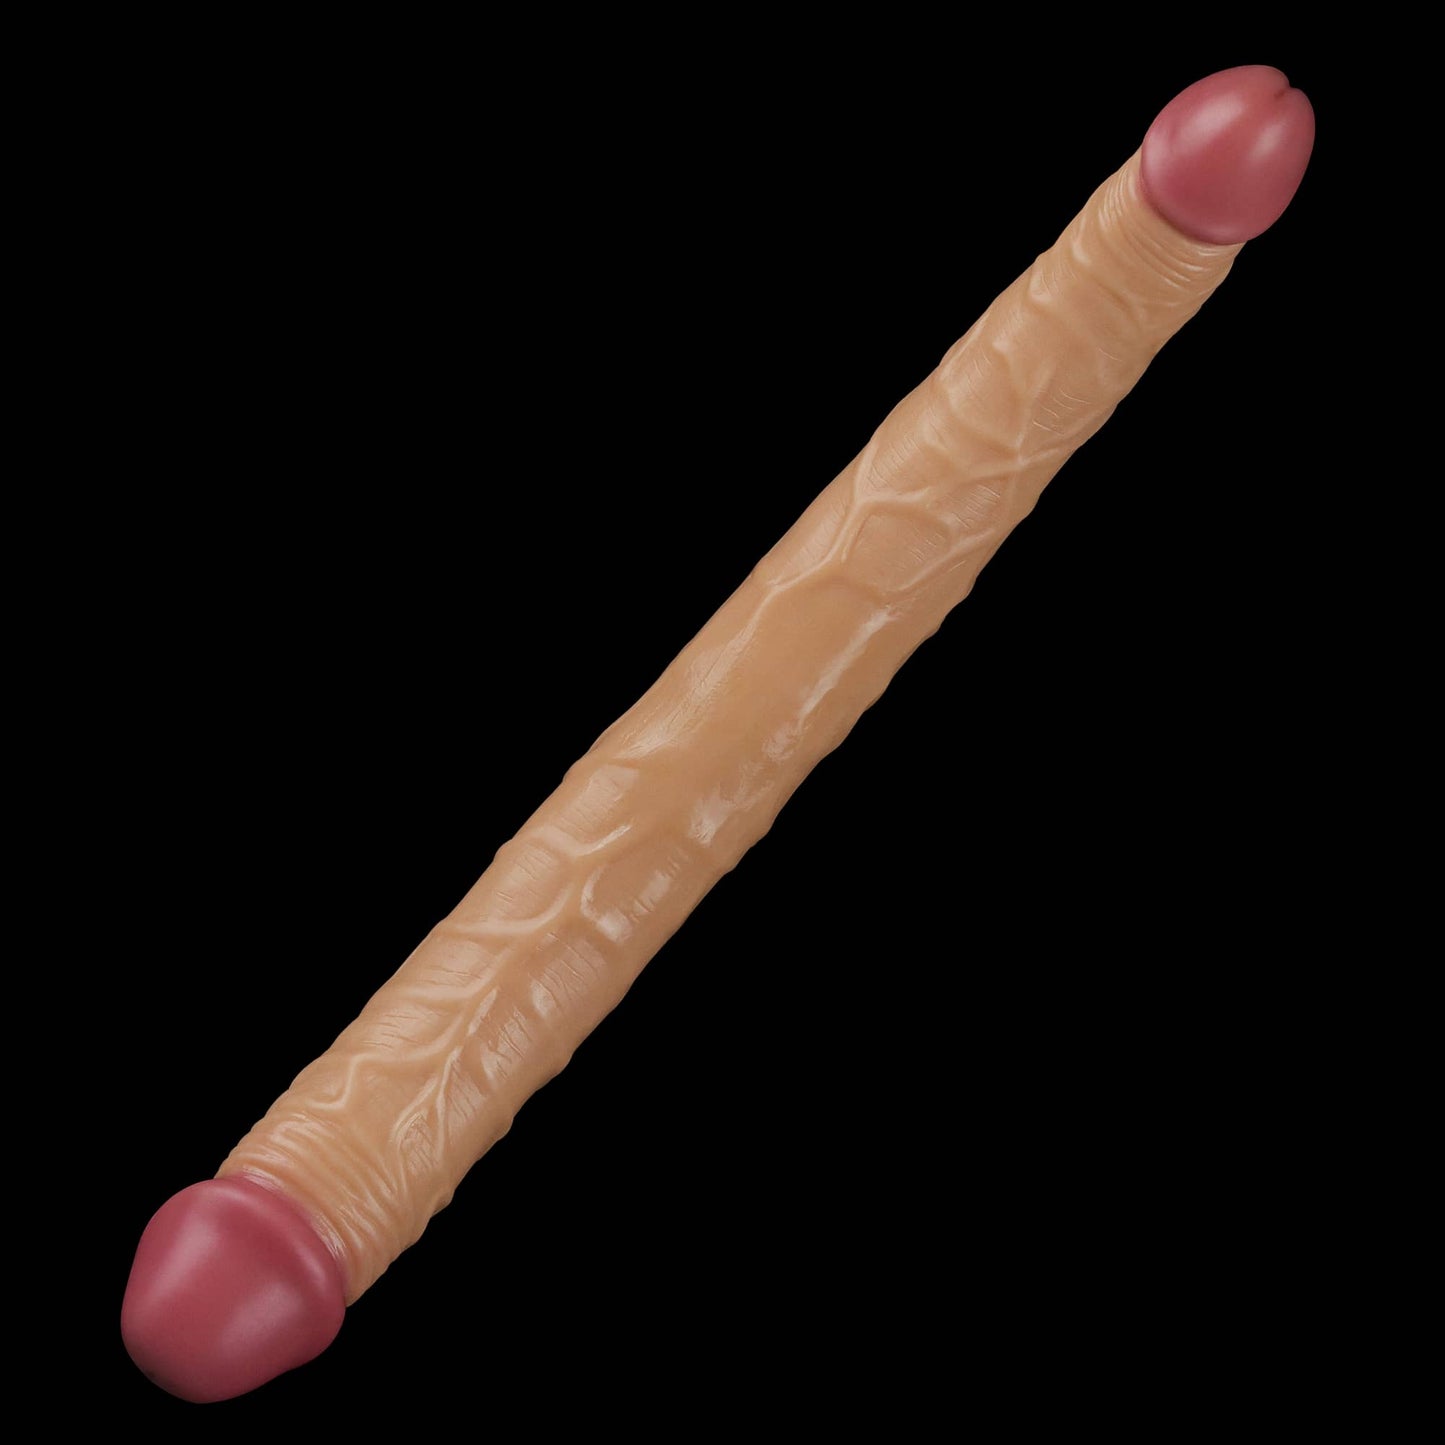 The 14 inches double ended realistic dildo with lifelike hyper realistic veins